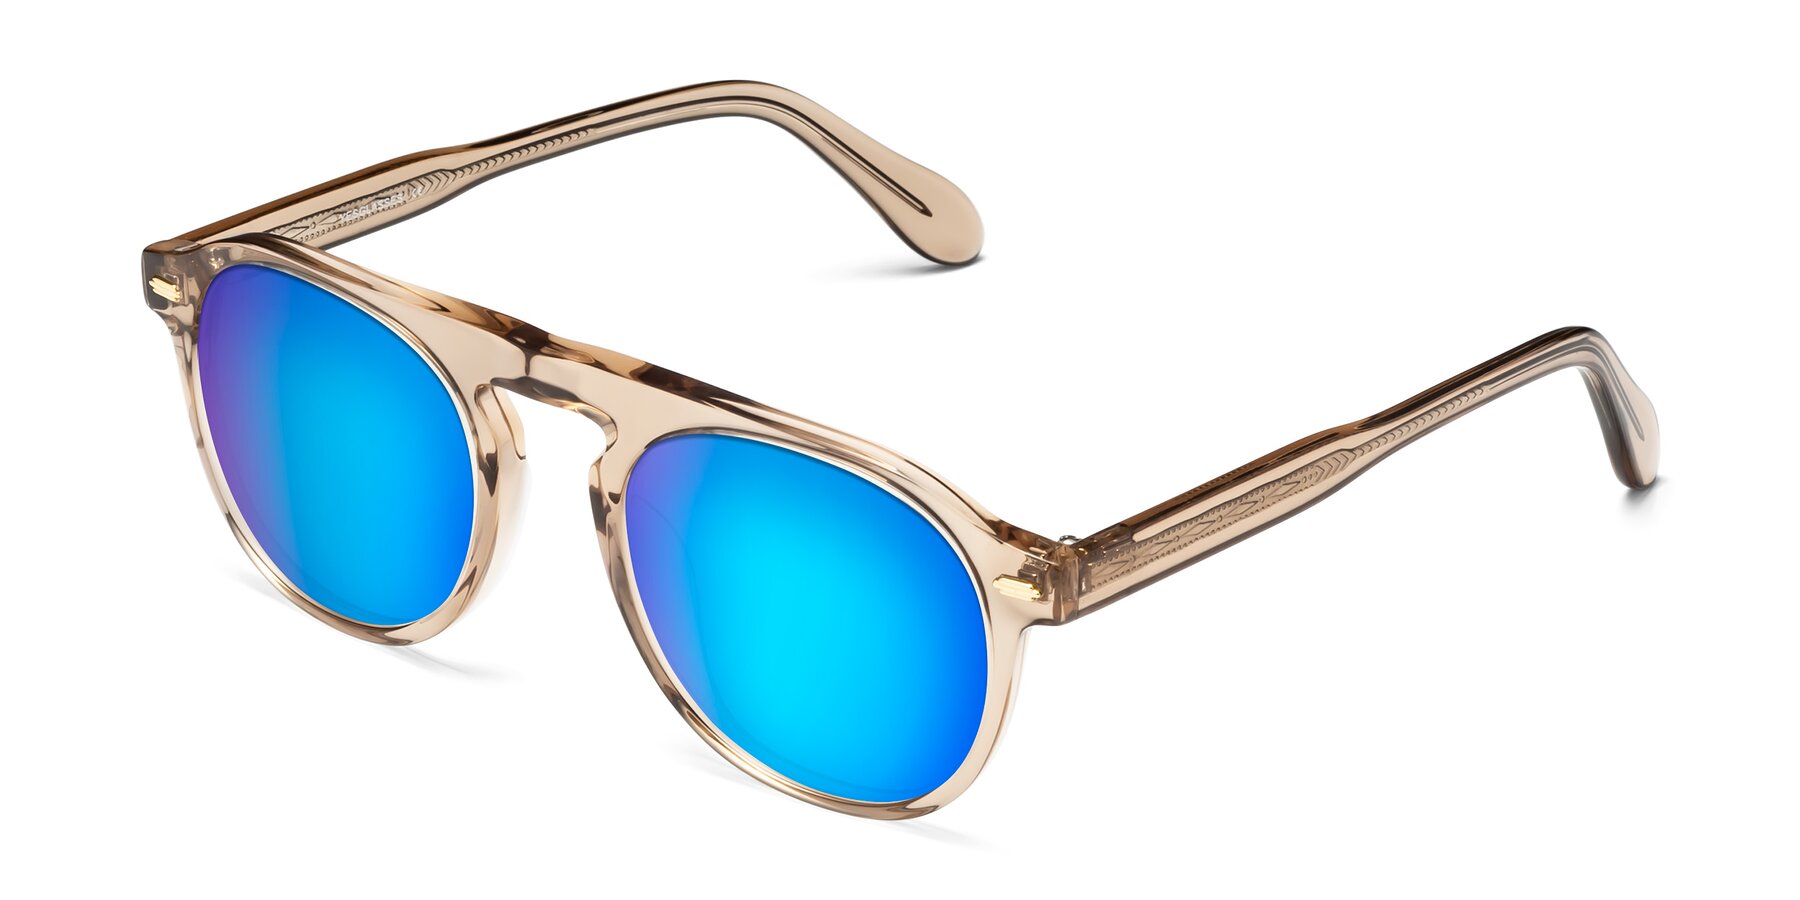 Angle of Mufasa in light Brown with Blue Mirrored Lenses